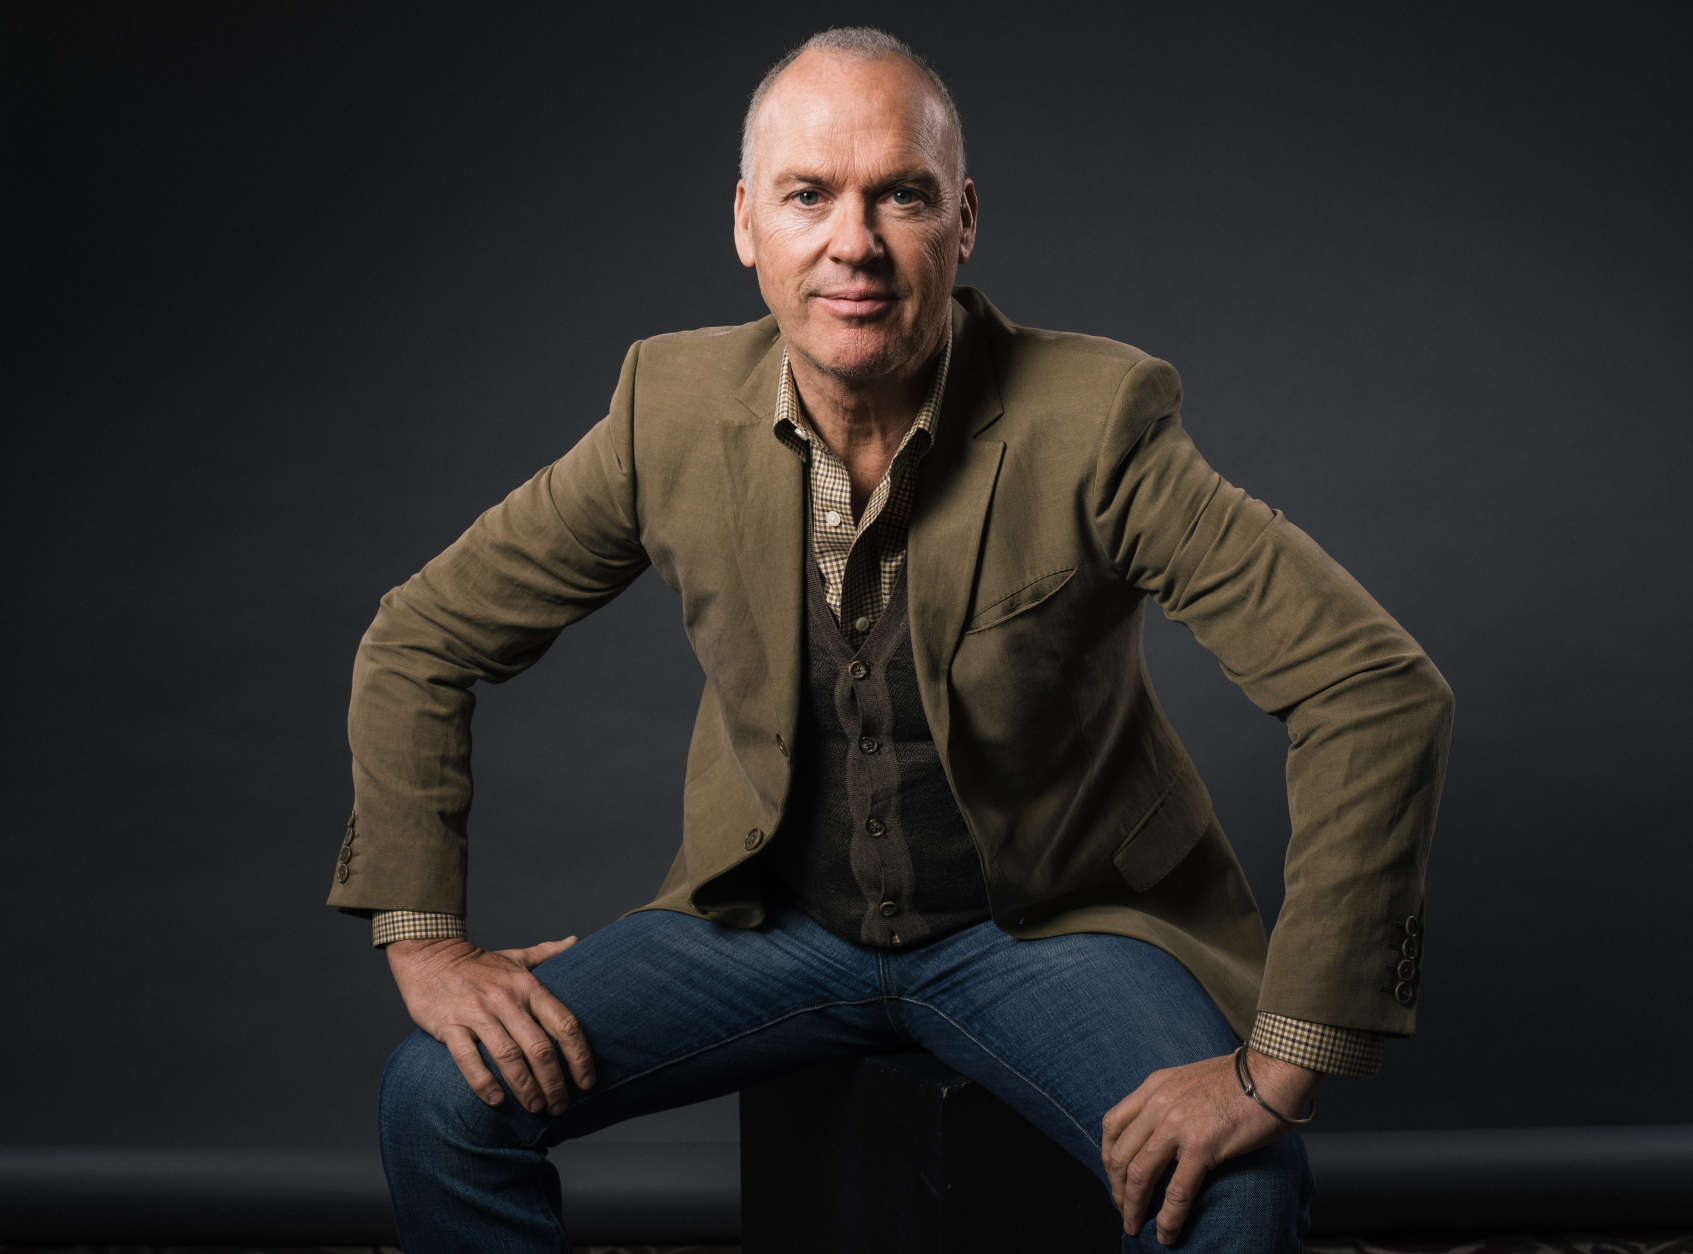 Michael Keaton poses for a portrait during press day for "Spotlight" at The Four Seasons on Wednesday, Nov. 4, 2015, in Los Angeles. Keaton portrays Walter "Robby" Robinson in the movie which opens in U.S. theaters on Nov. 6, 2015.  (Photo by Casey Curry/Invision/AP)